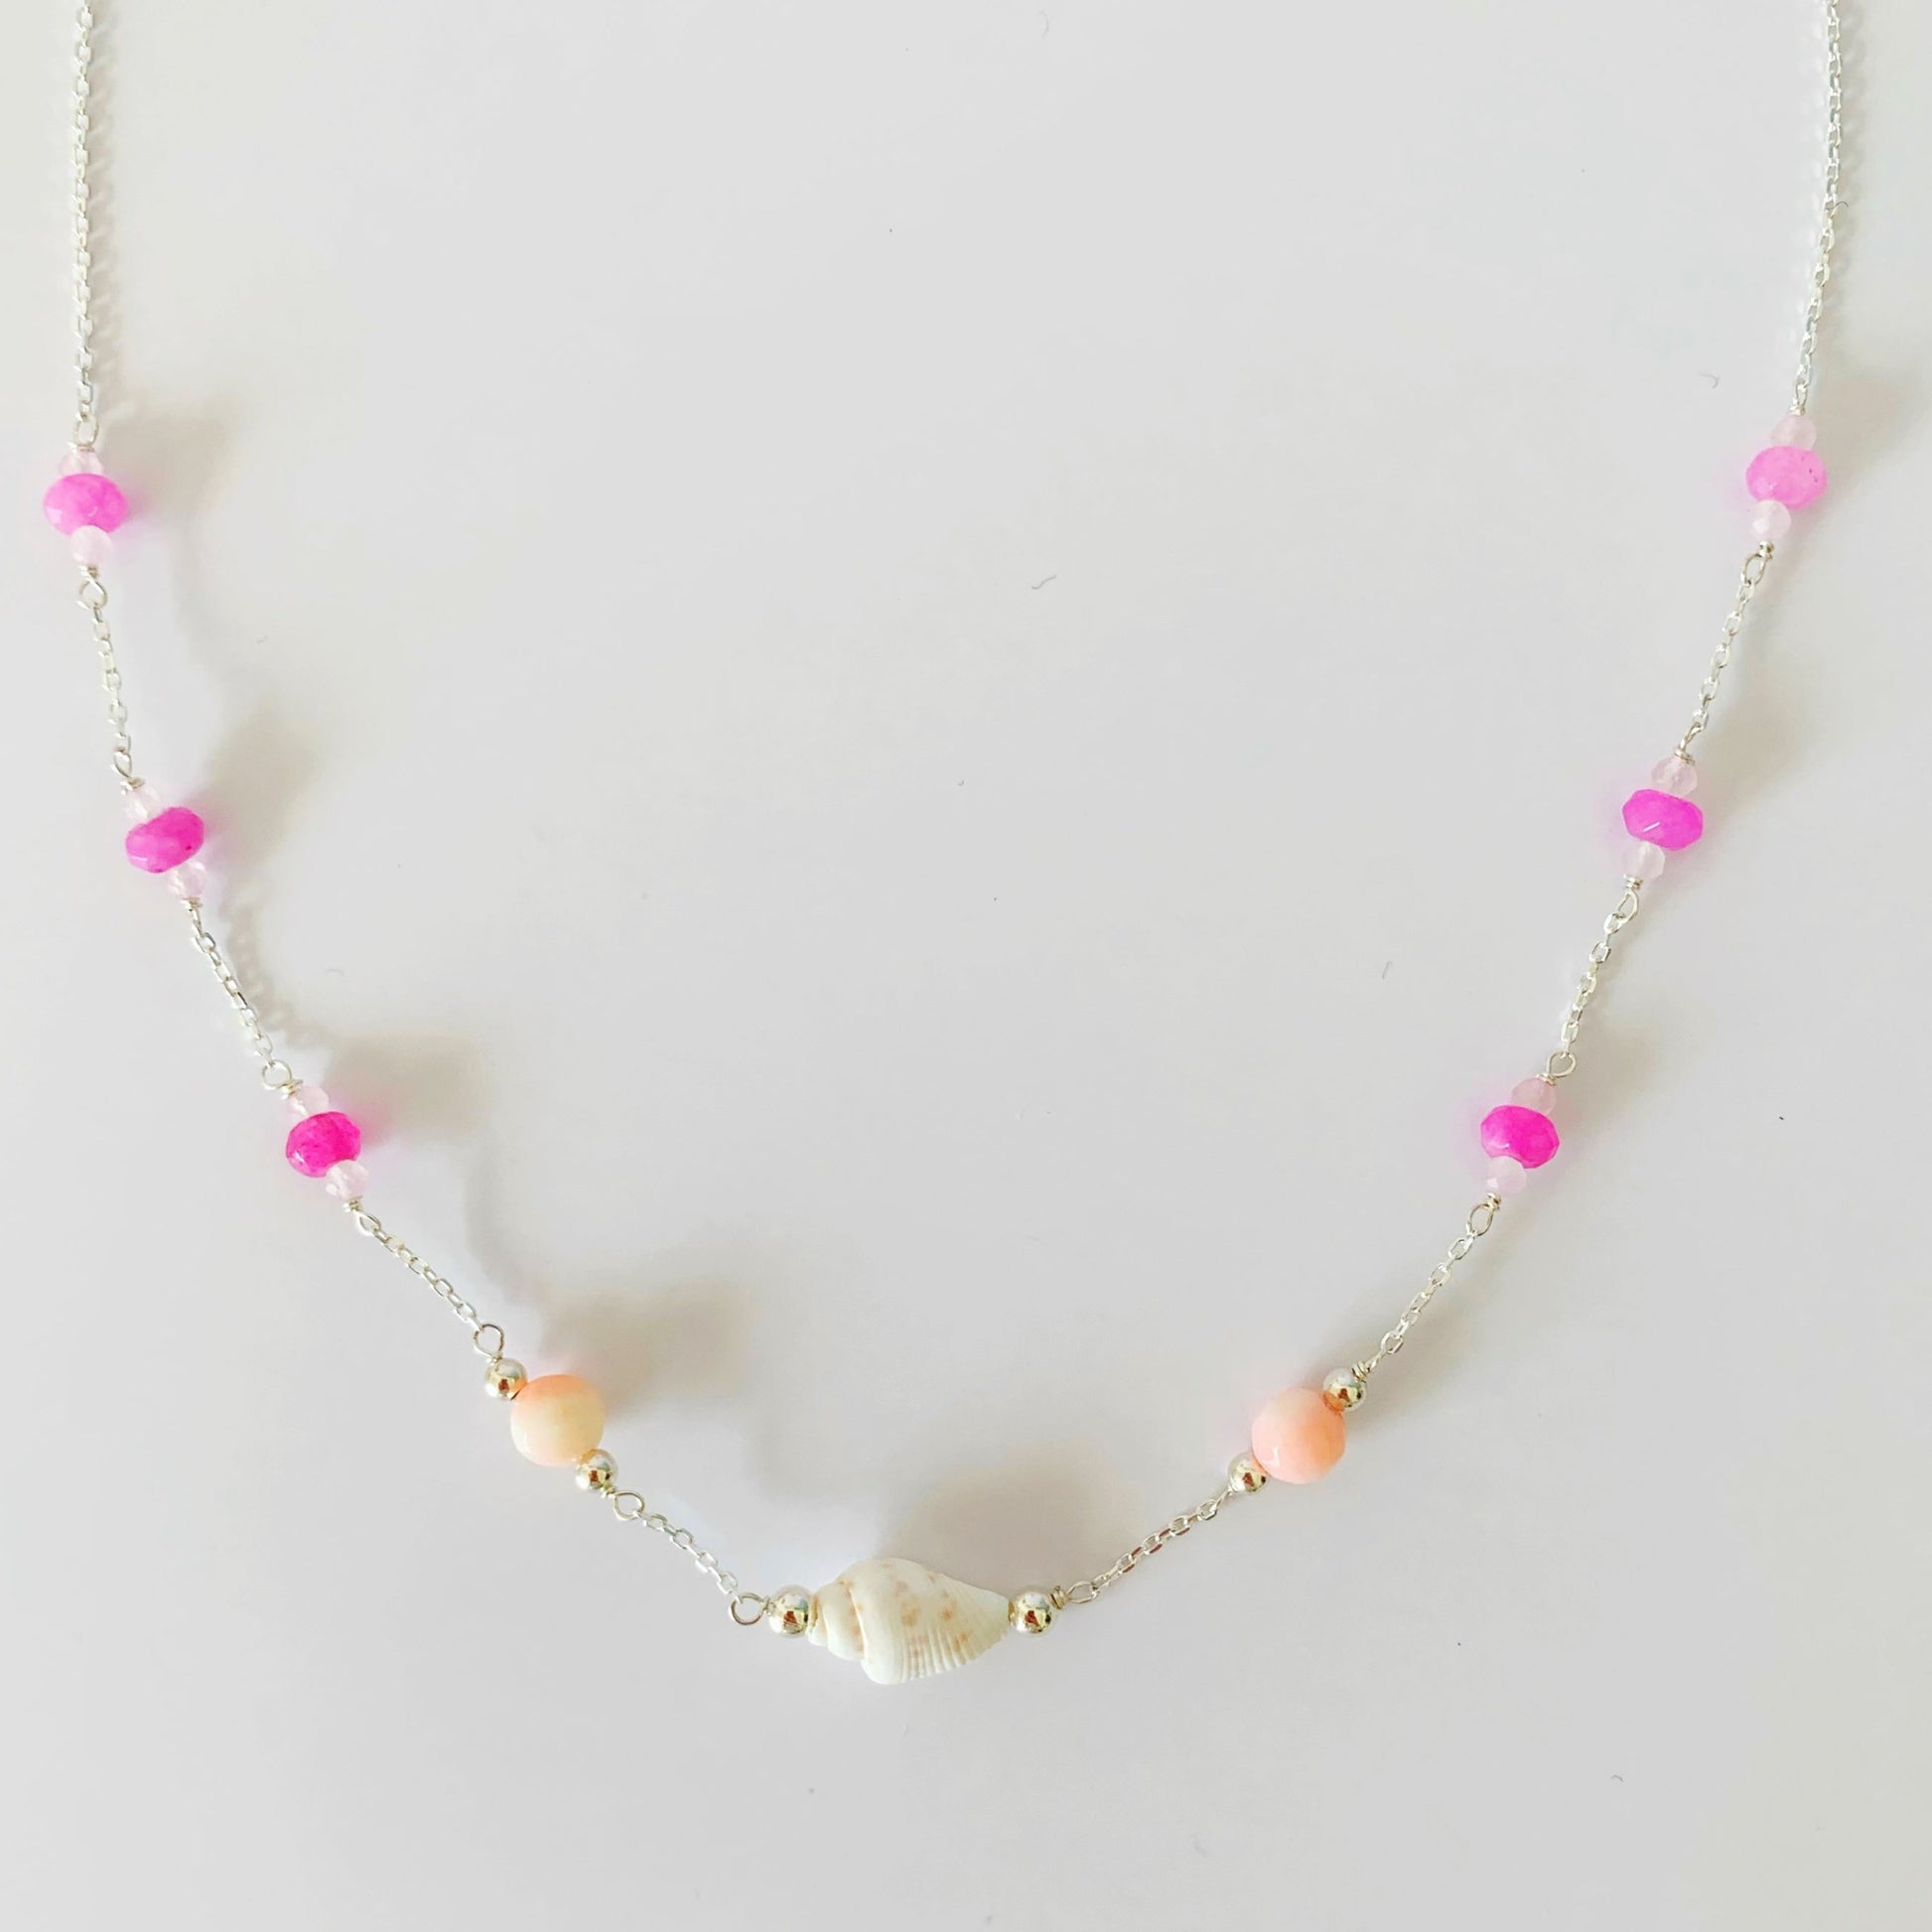 The pink flamingo shellebration necklace by mermaids and madeleines is created with a shell and coral beads at the center with dyed hot pink jade and rose quartz rondelles spaced out going up the sterling chain to the clasp. this necklace is photographed on a white surface